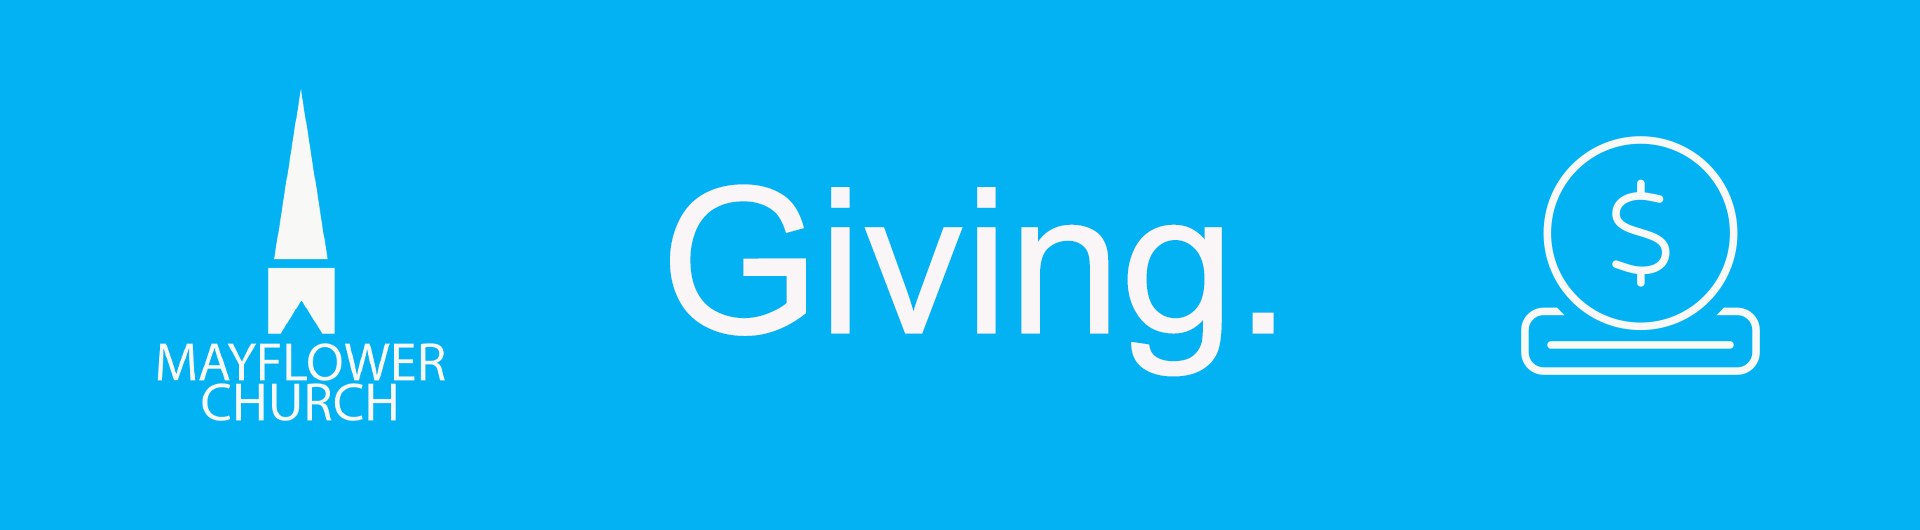 Giving.png